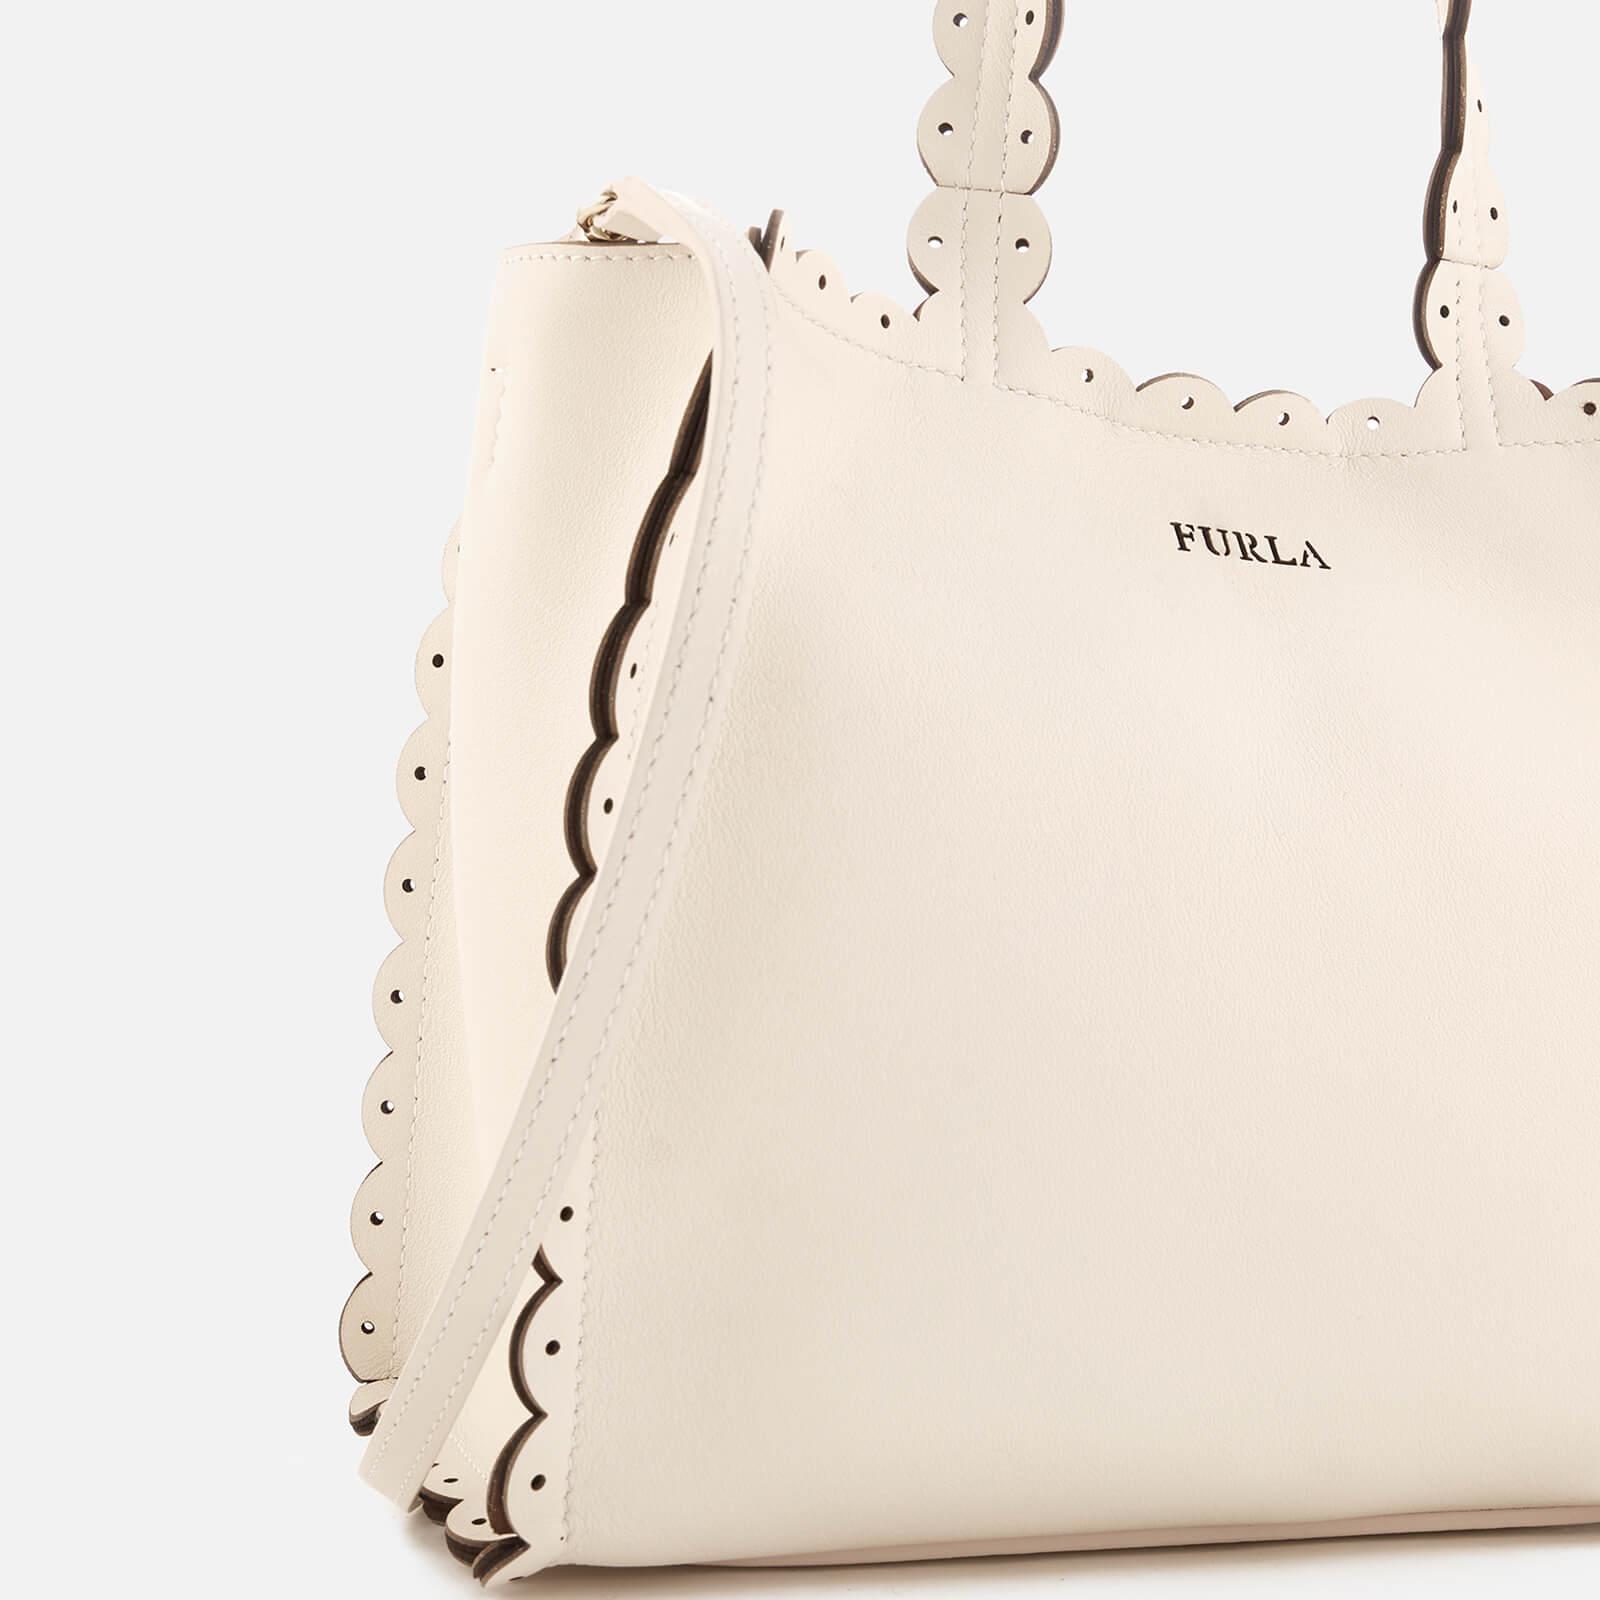 Furla Leather Merletto Small Tote Bag in Natural - Lyst